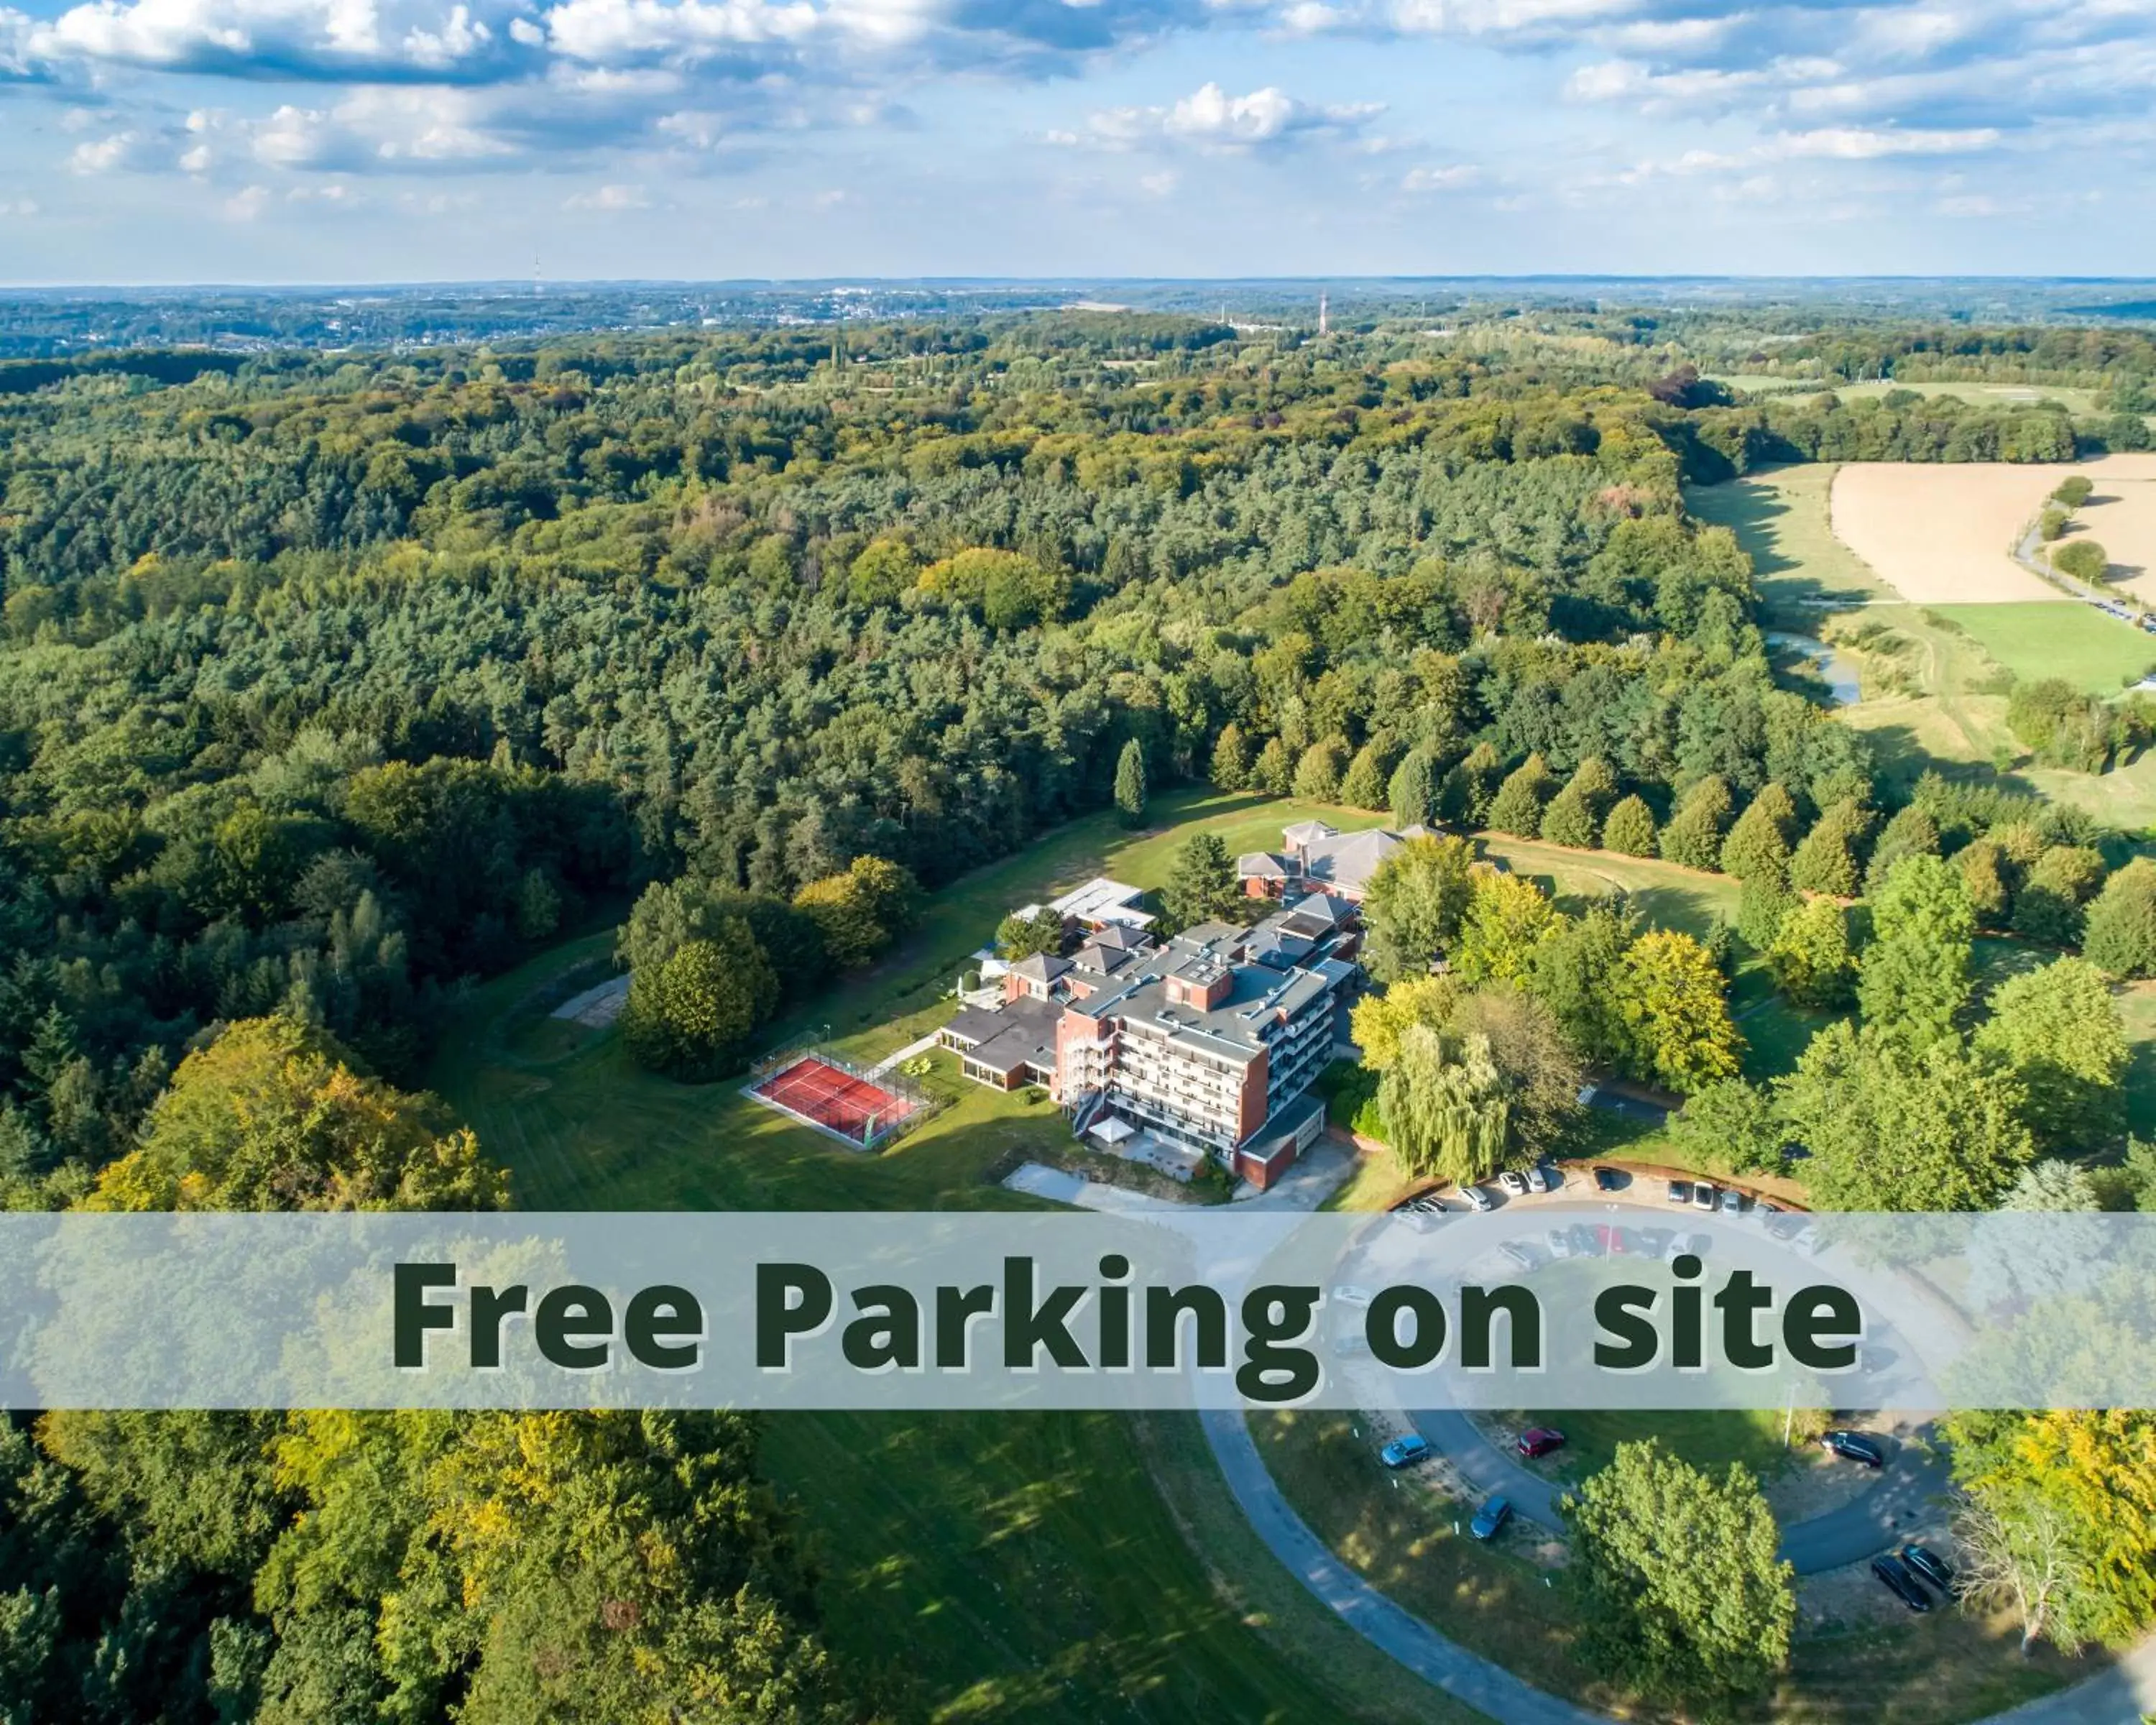 Parking, Bird's-eye View in ibis Styles Louvain-la-Neuve Hotel and Events